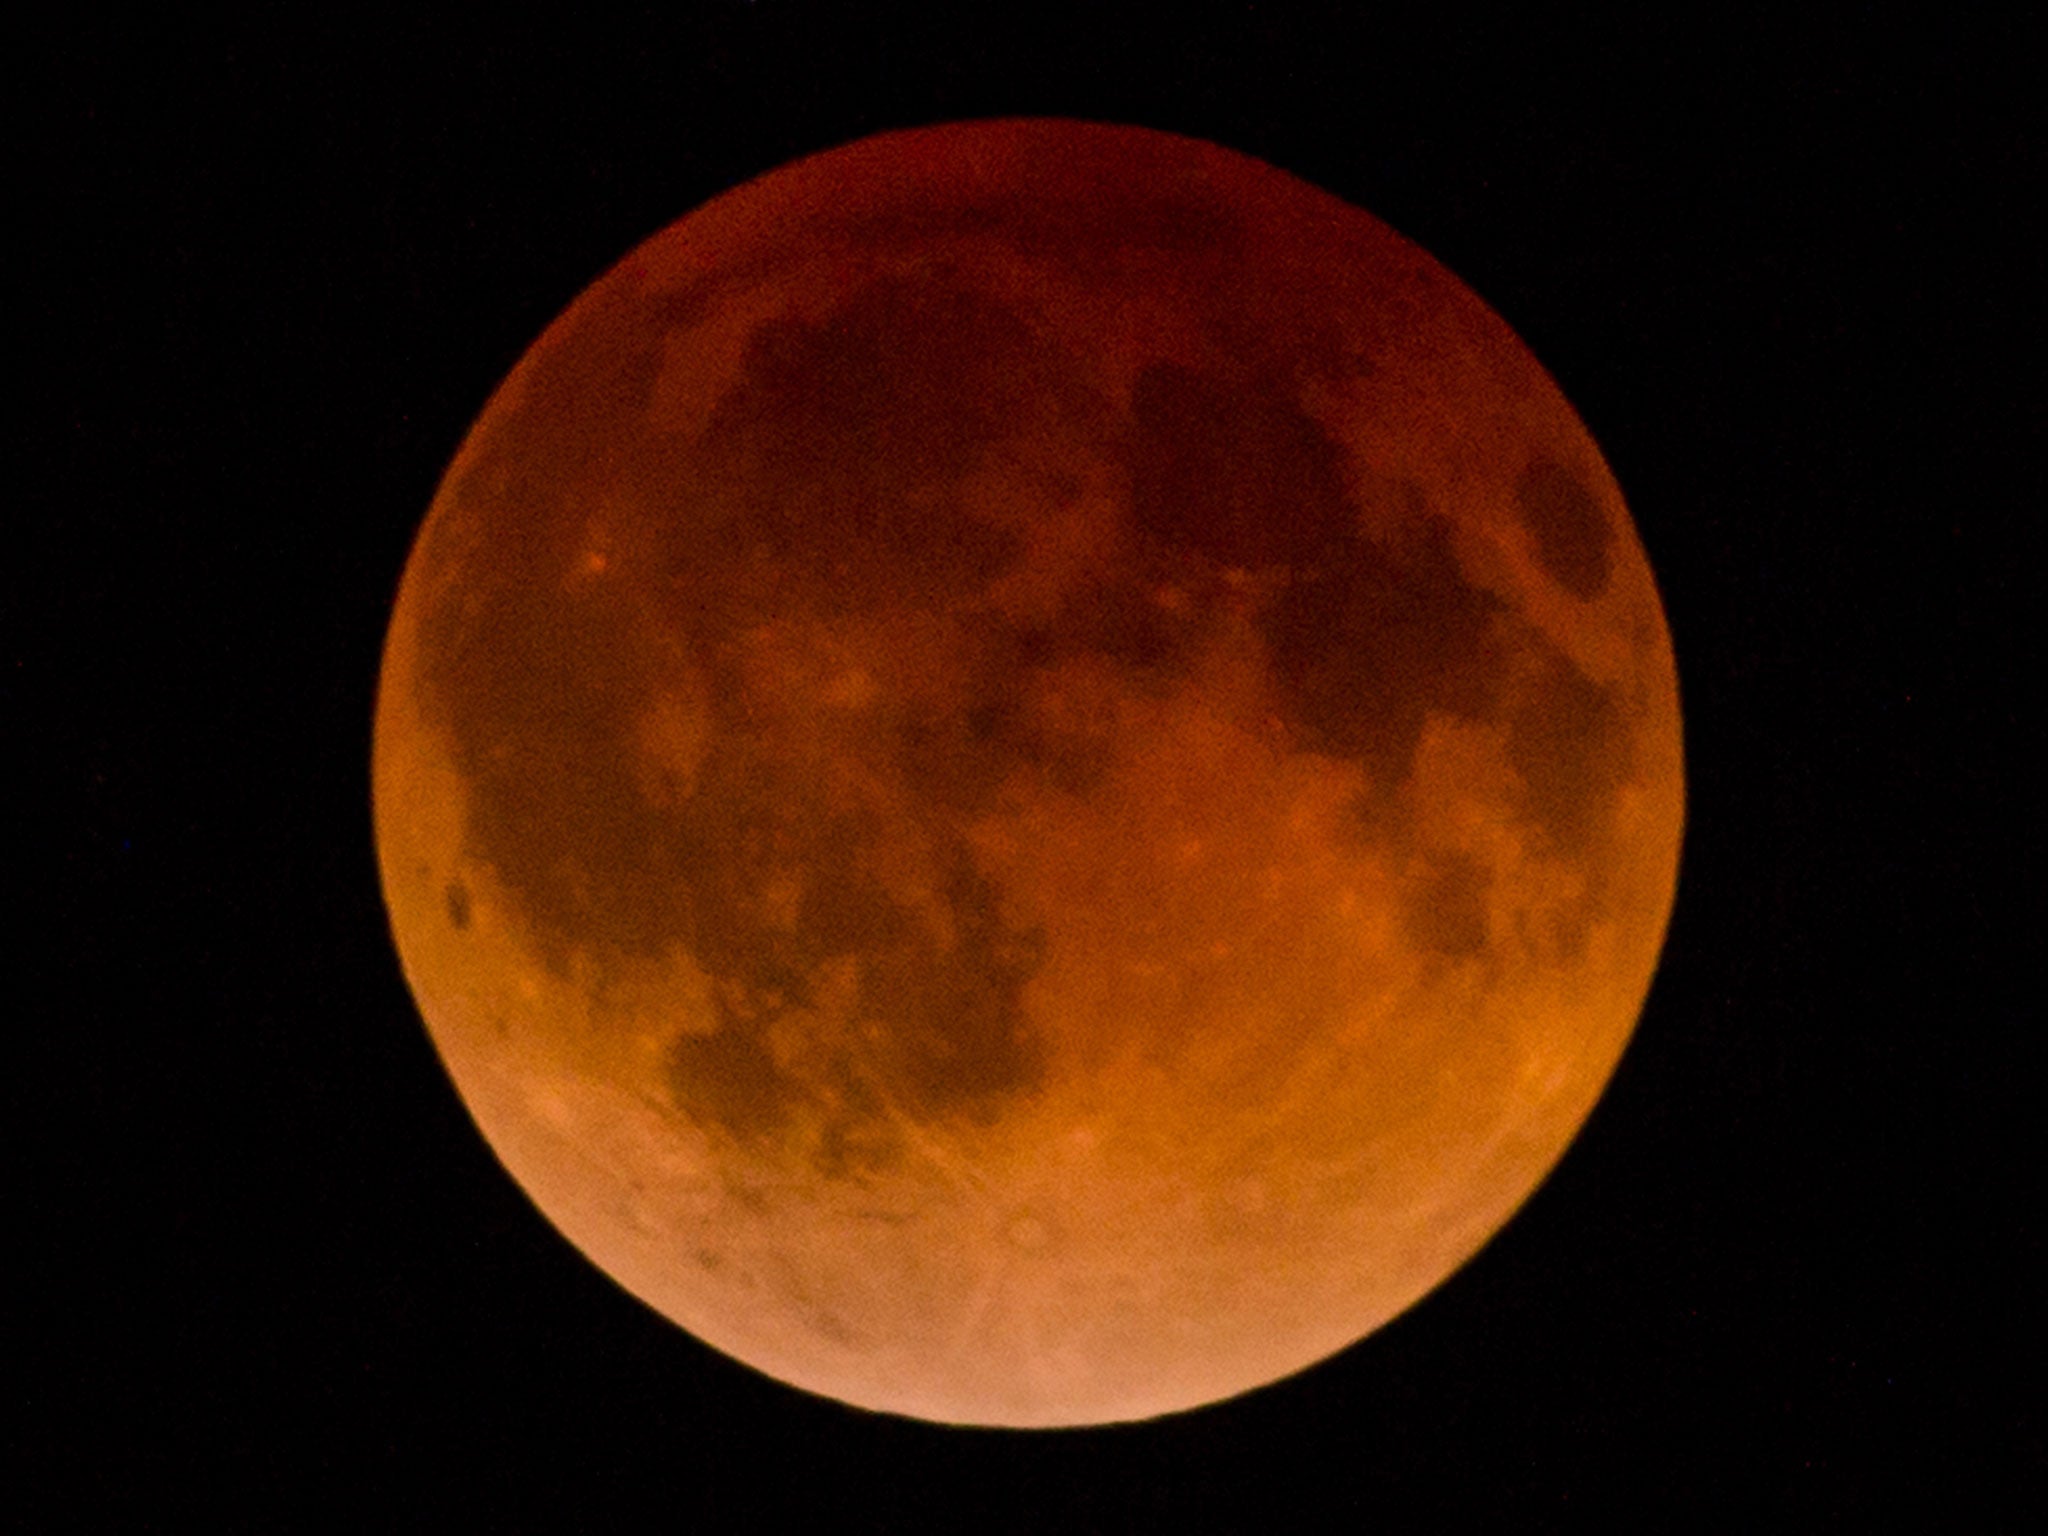 A total lunar eclipse was visible from North and South America, but sky watchers in northern and and eastern Europe, eastern Africa, the Middle East and Central Asia were out of luck, according to US space agency NASA